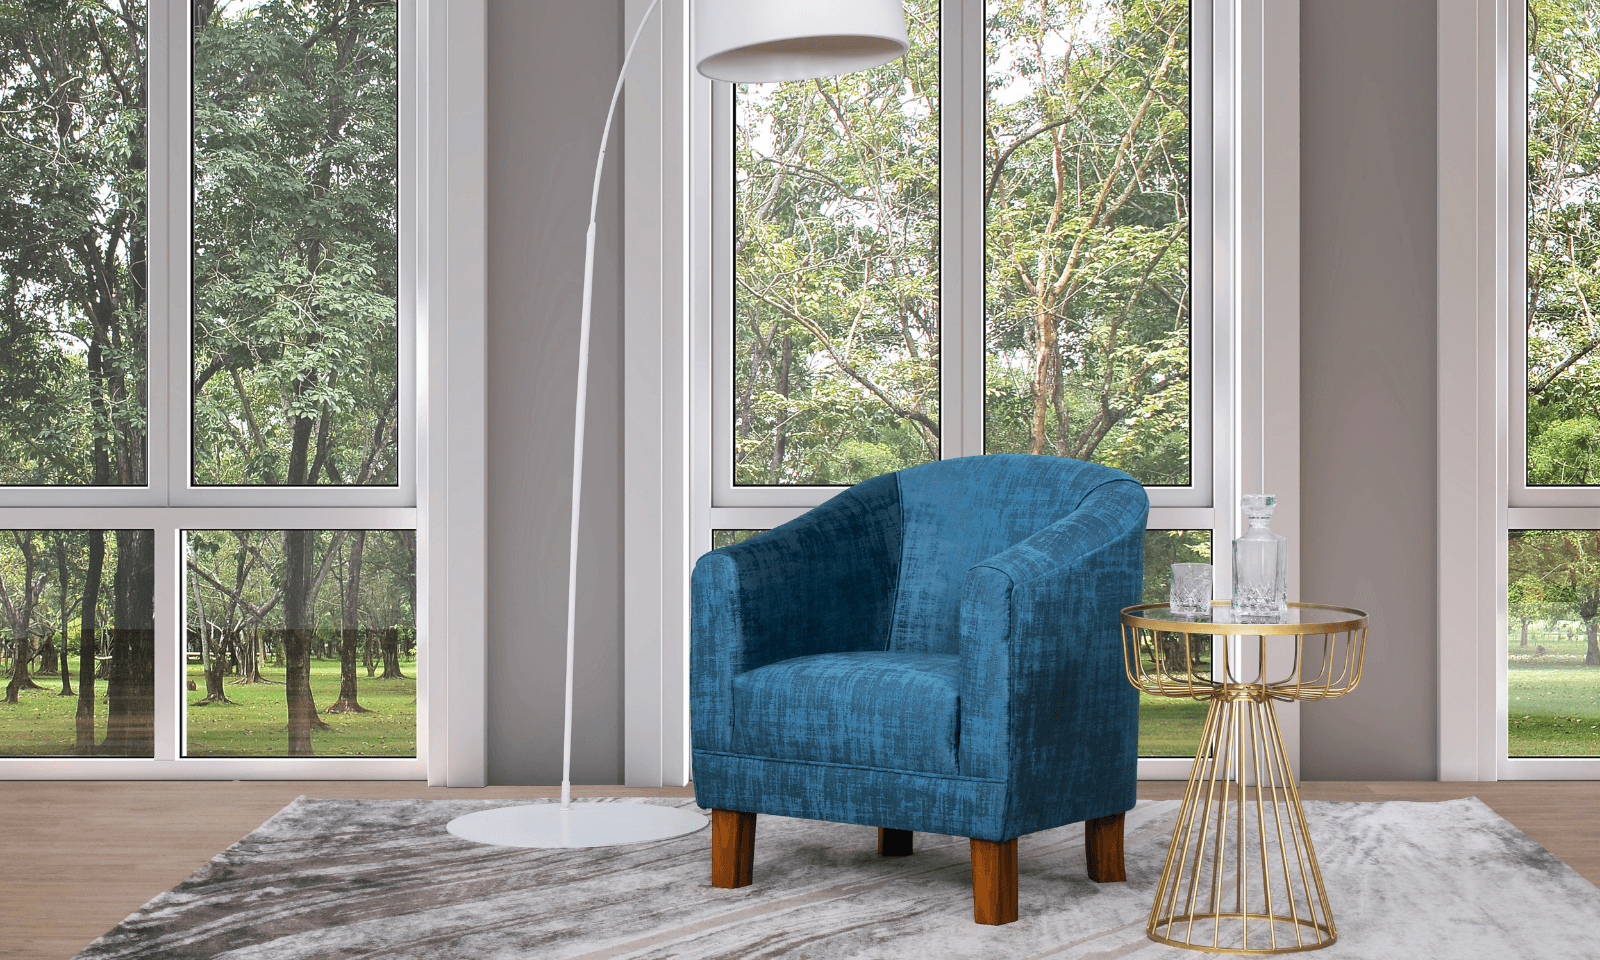 WHY THE CLUB OCCASIONAL CHAIR IS PERFECT FOR COMPLETING YOUR LIVING ROOM SETTING